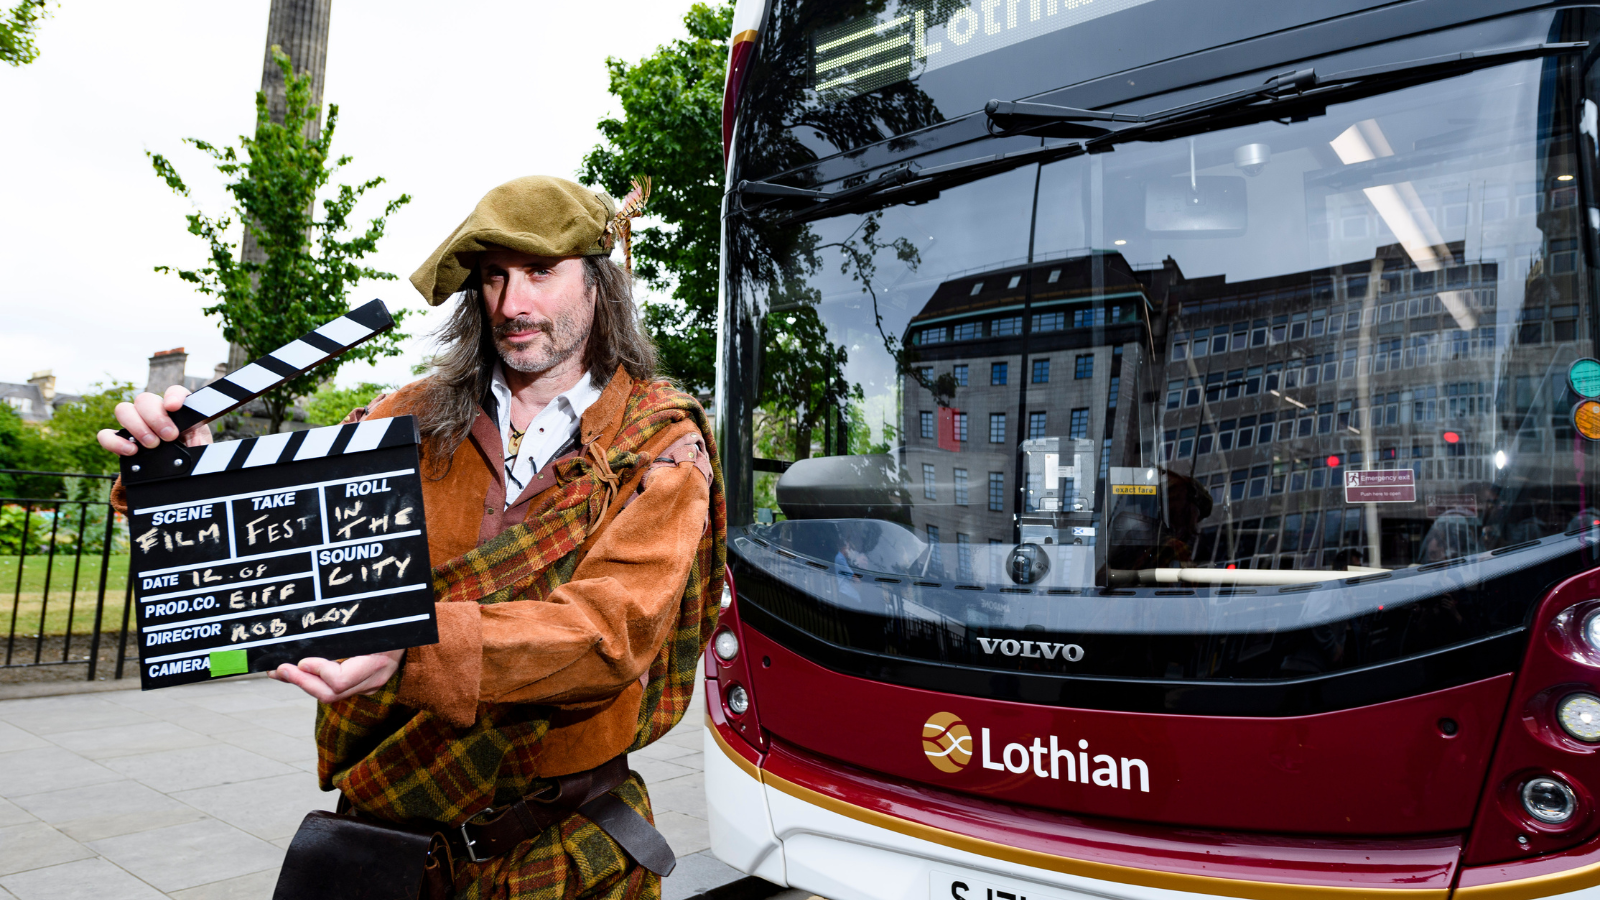 A man in traditional Highland dress holding a clapperboard in front of a red, white and gold Lothian city bus.